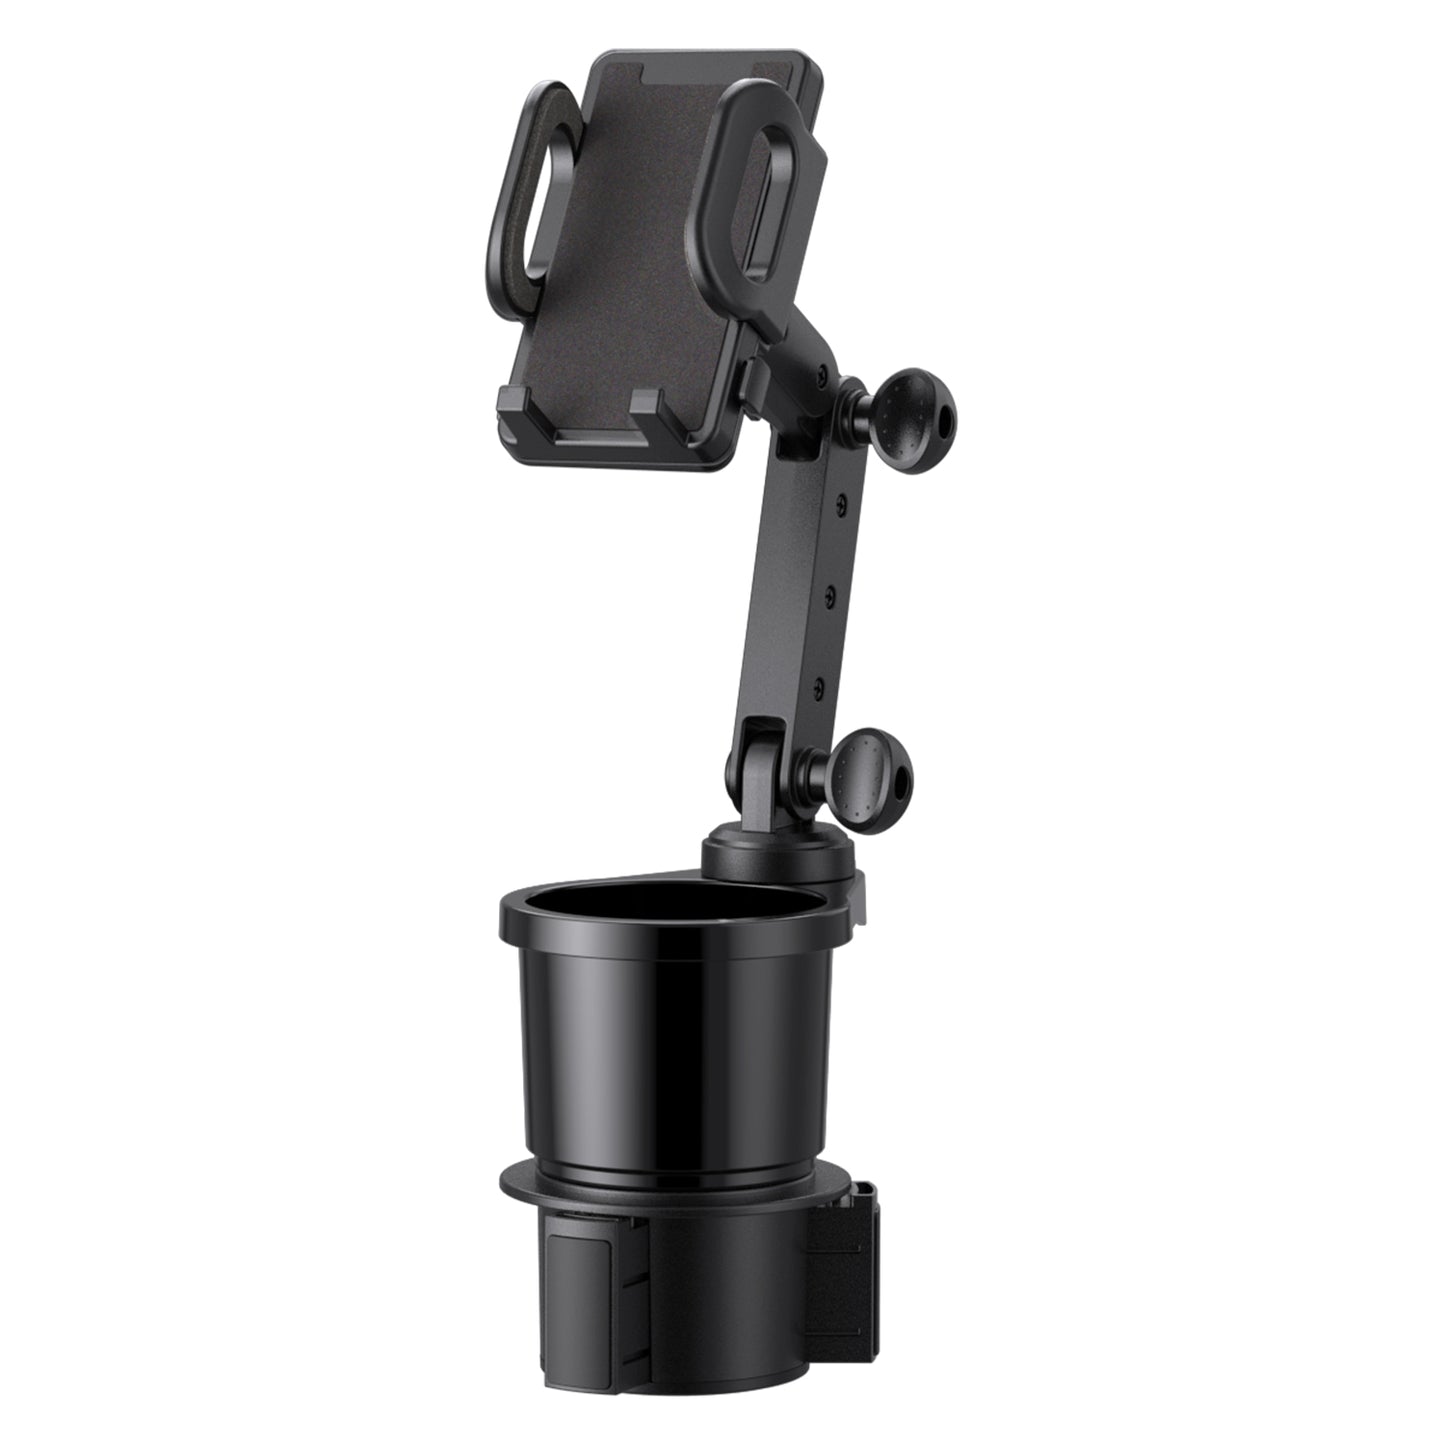 Cup Holder With Phone Holder; Adjustable Base To Fit Most Cars